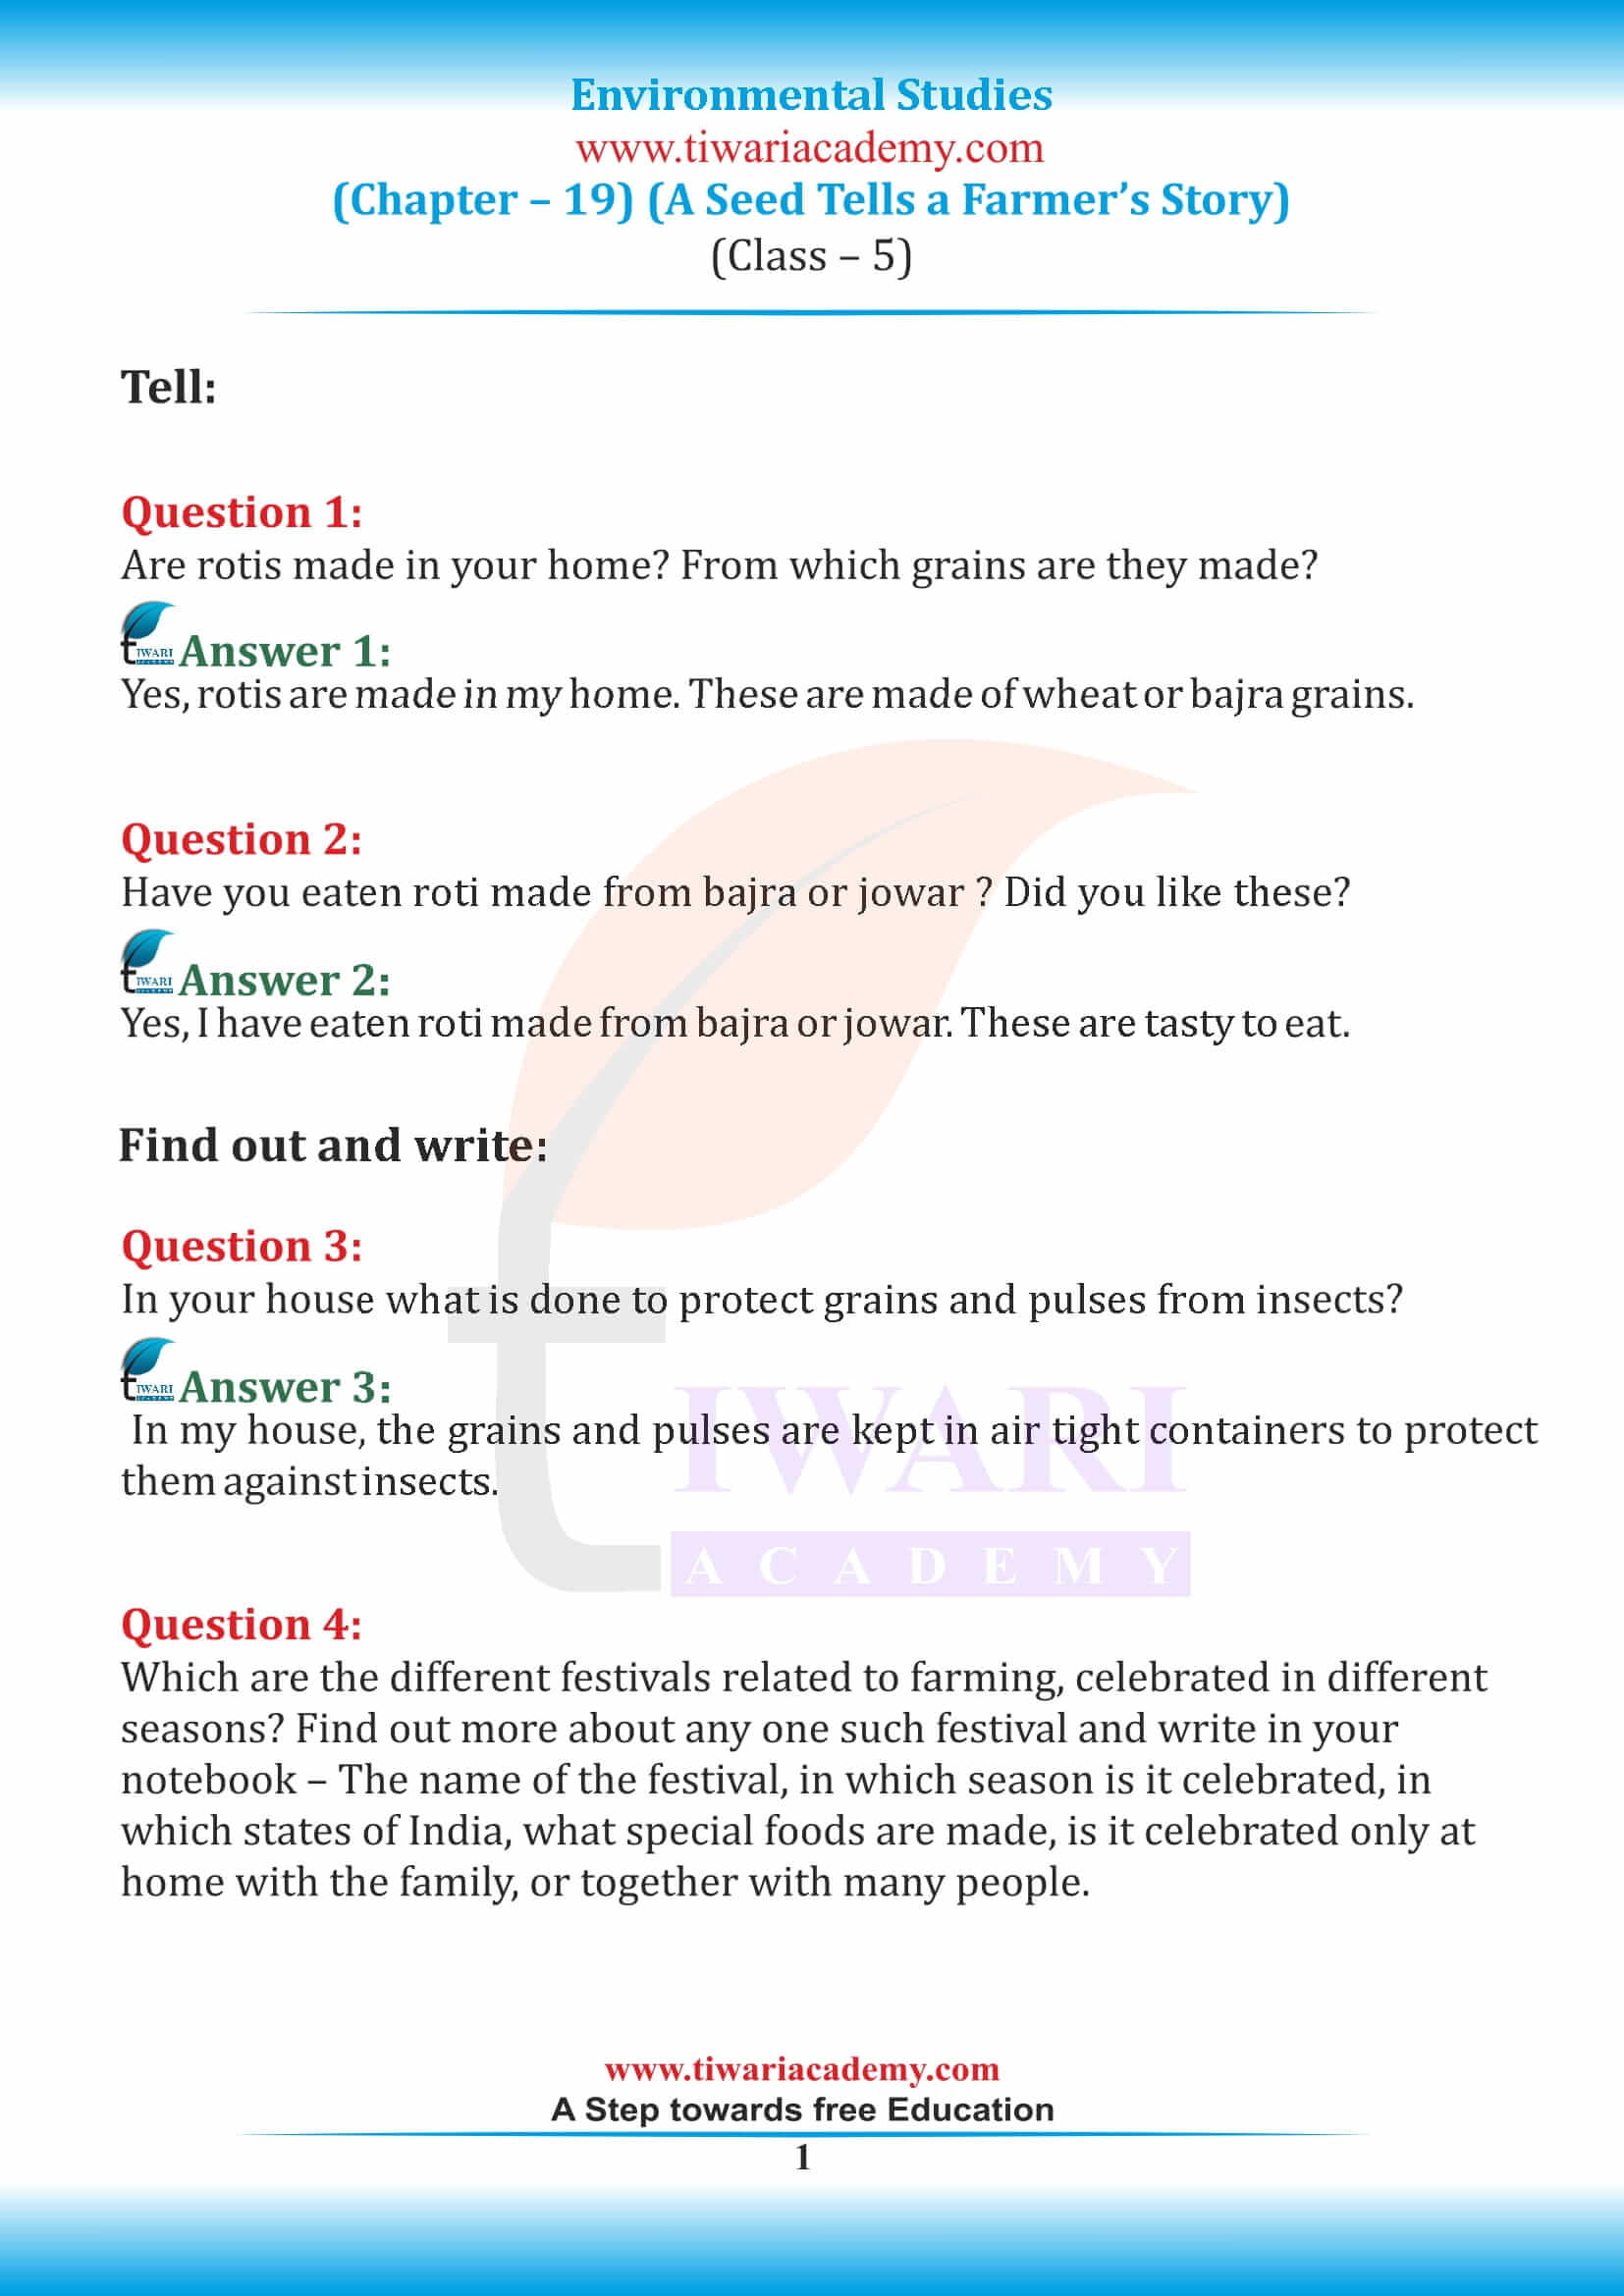 NCERT Solutions for Class 5 EVS Chapter 19 A Seed tells a Farmer’s Story